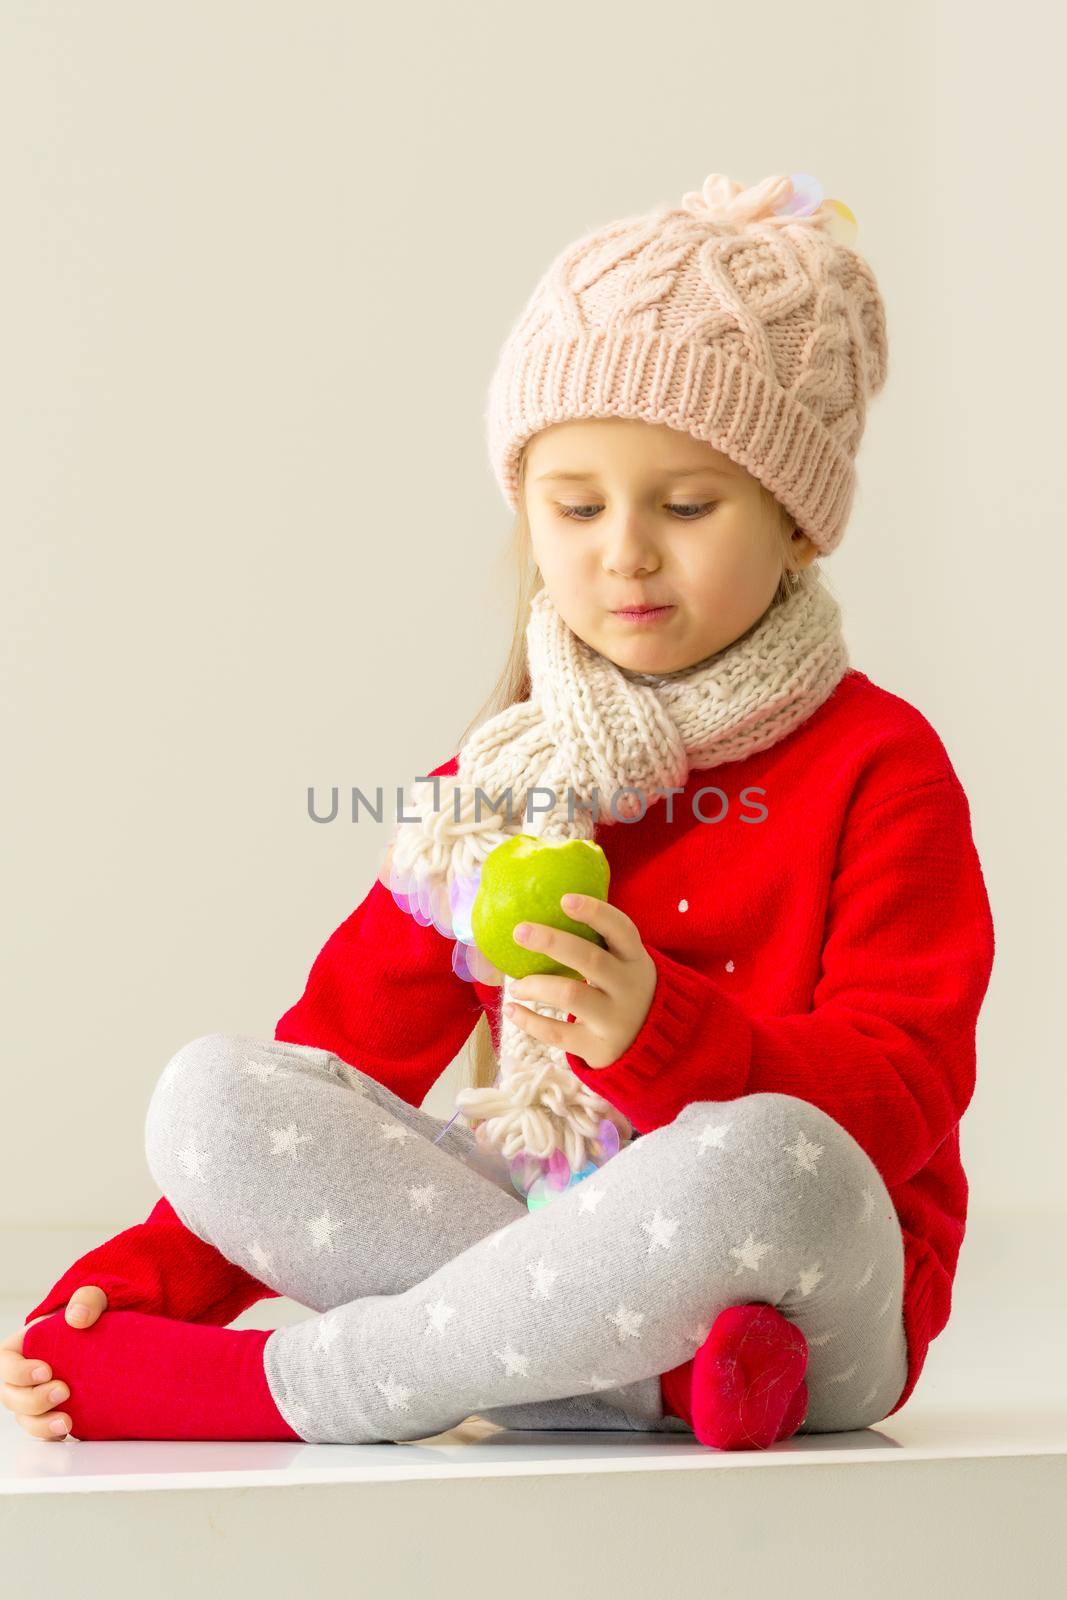 Cute little girl eating an apple. Healthy food concept. On a white background.